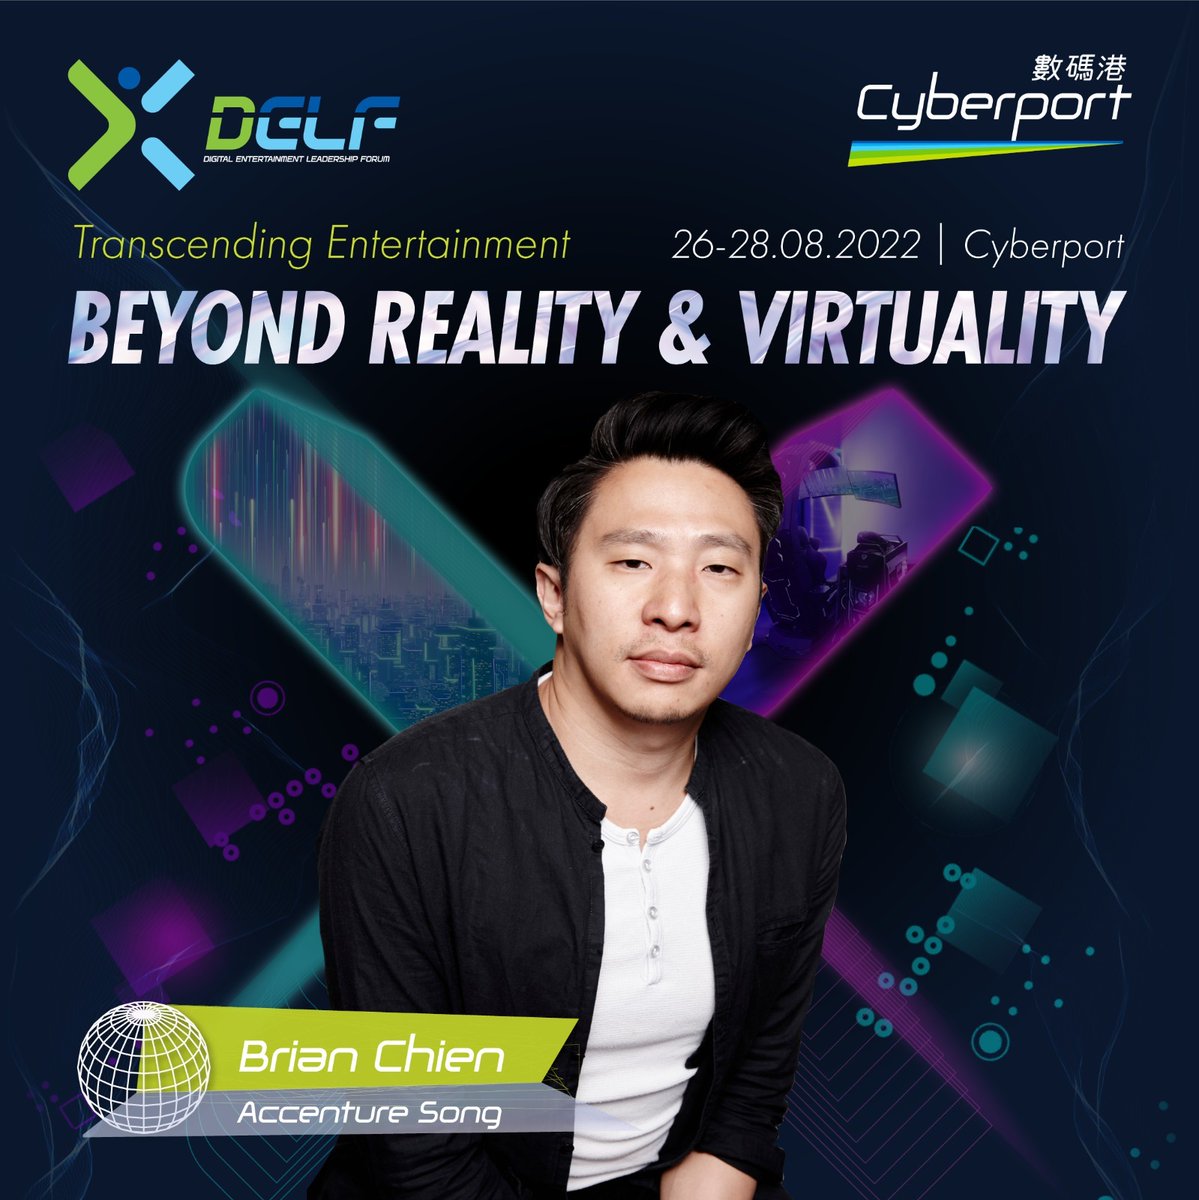 Join #DELF2022 to learn more about how the #MetaverseContinuum will revolutionize life and enterprise in the next decade! Register NOW on bit.ly/3avKYk4 #Cyberport #DELF #DigitalEntertainment #Metaverse #Accenture